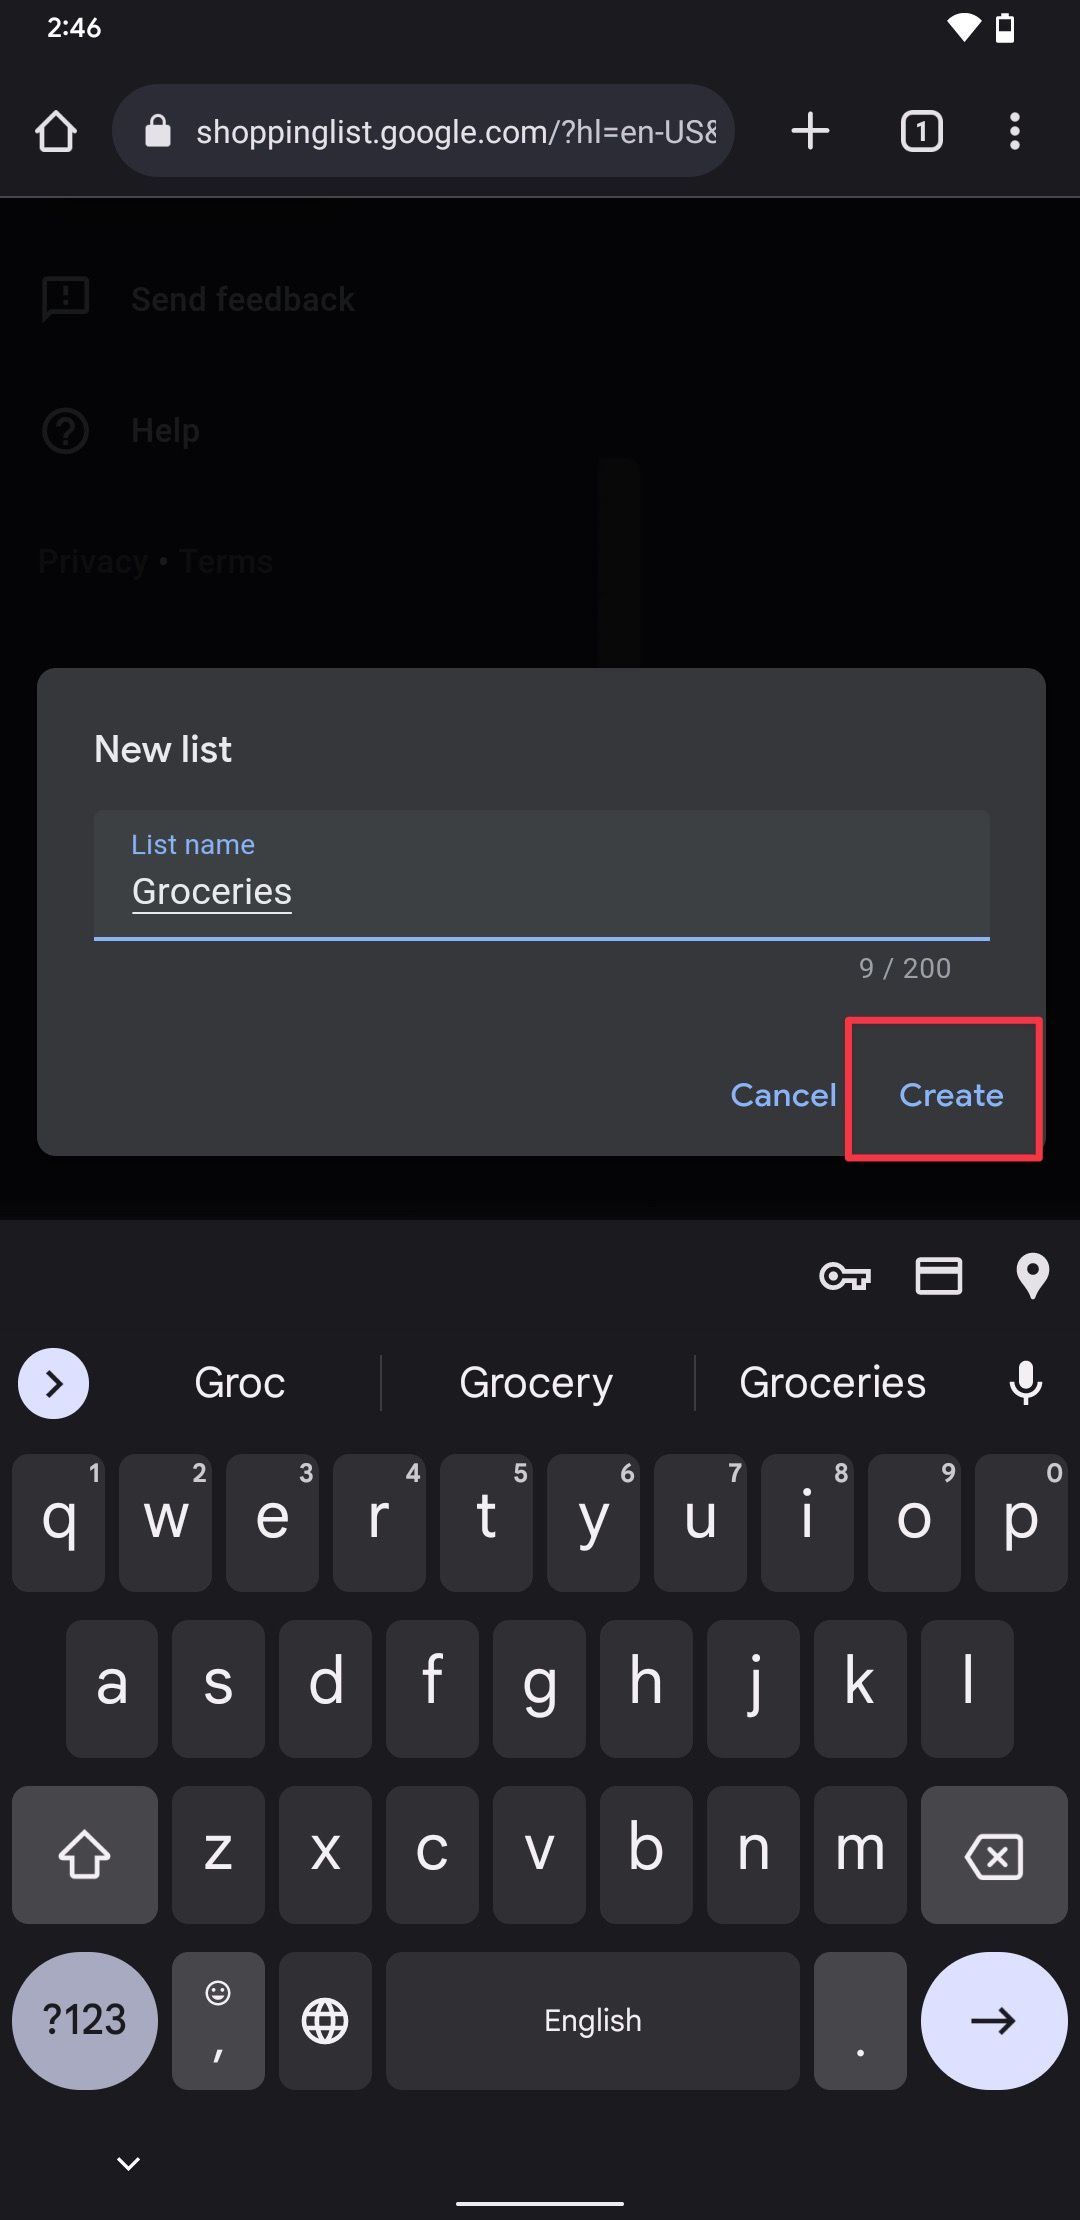 How to use Google Shopping List